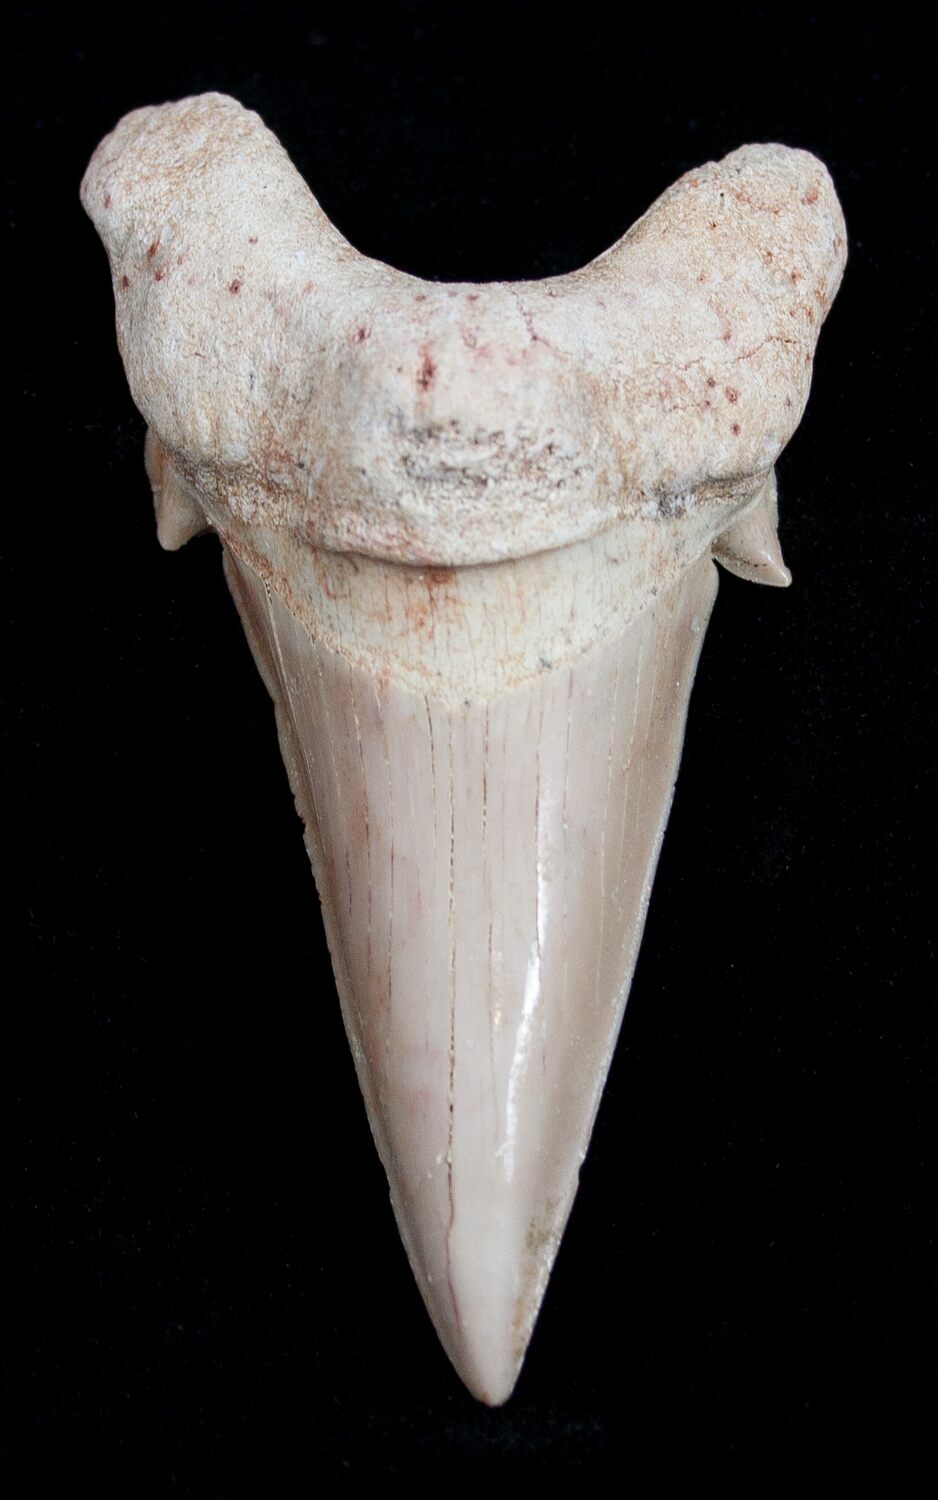 High Quality Otodus Fossil Shark Tooth For Sale (#1736) - FossilEra.com